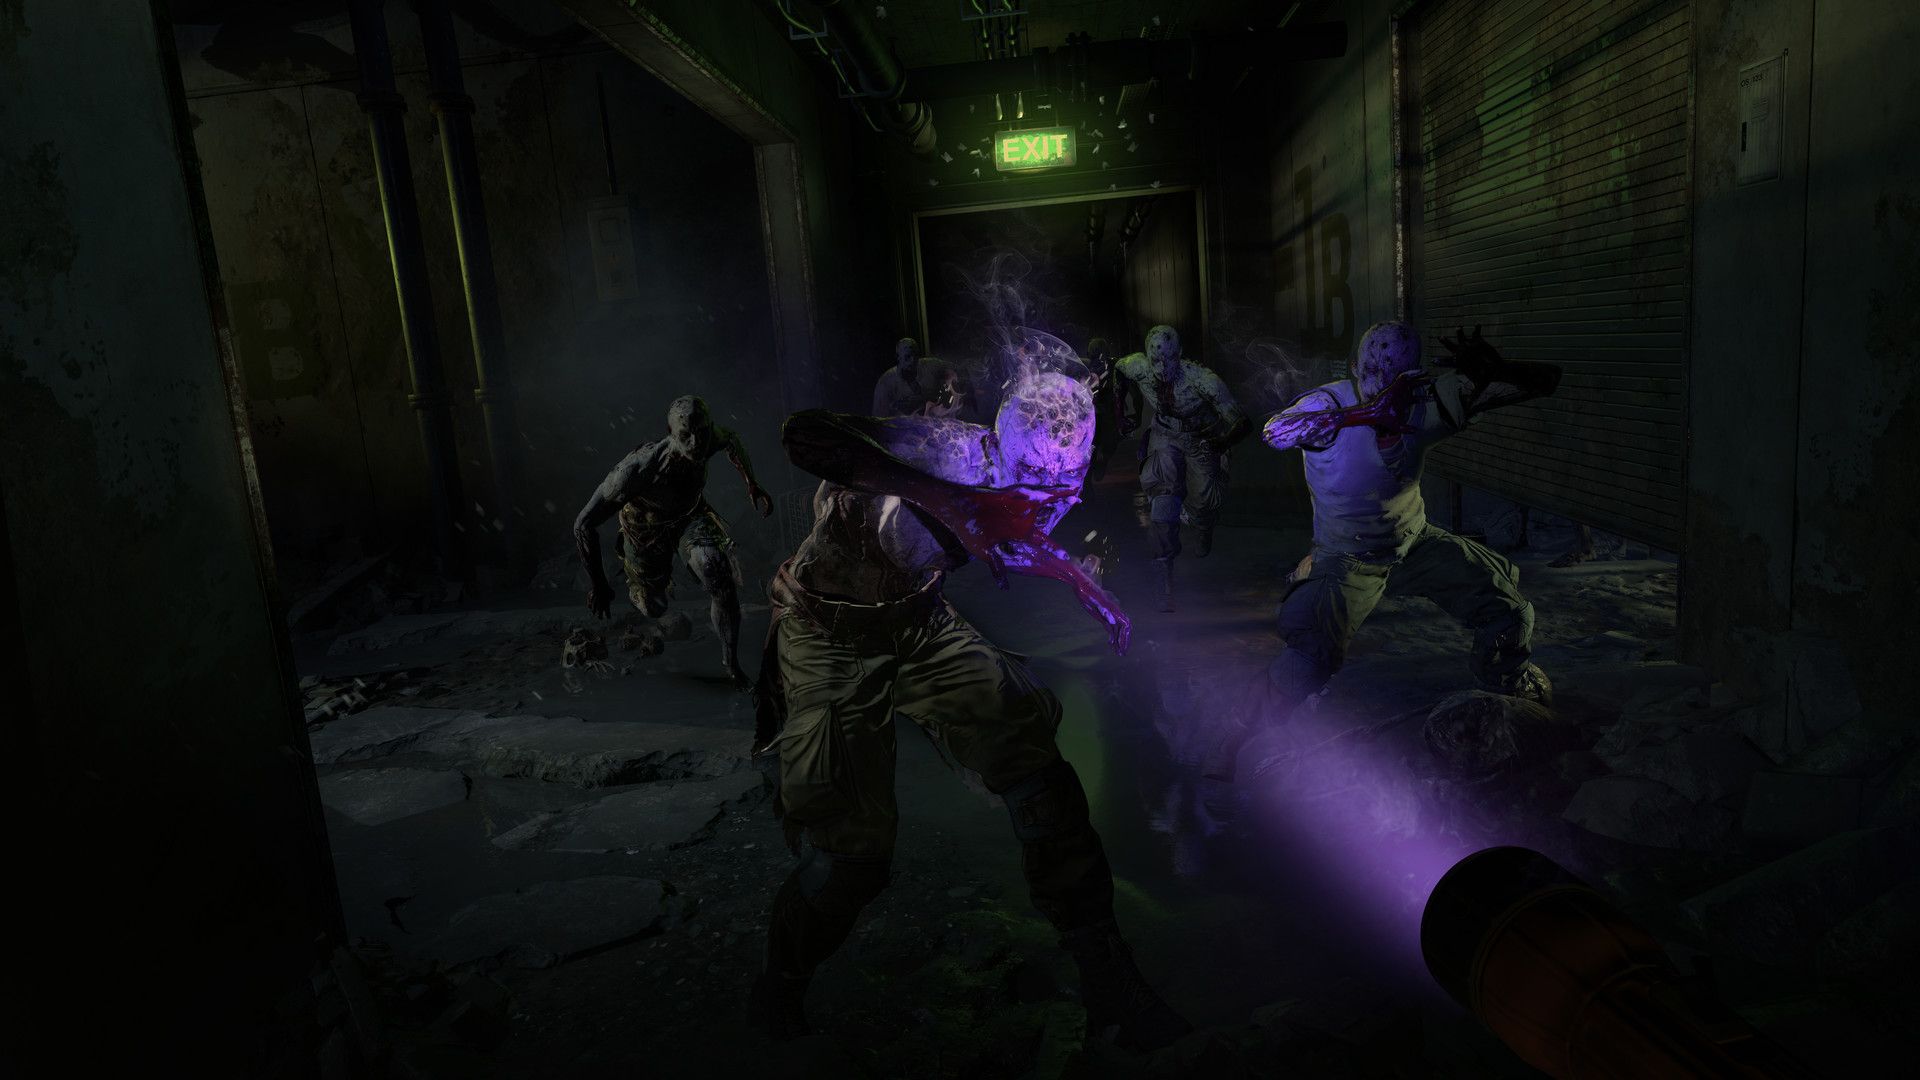 In this article, we are going to be covering how to get Dying Light 2 Ka Doom shotgun, so you can use this great weapon to destroy the hordes of zombies.